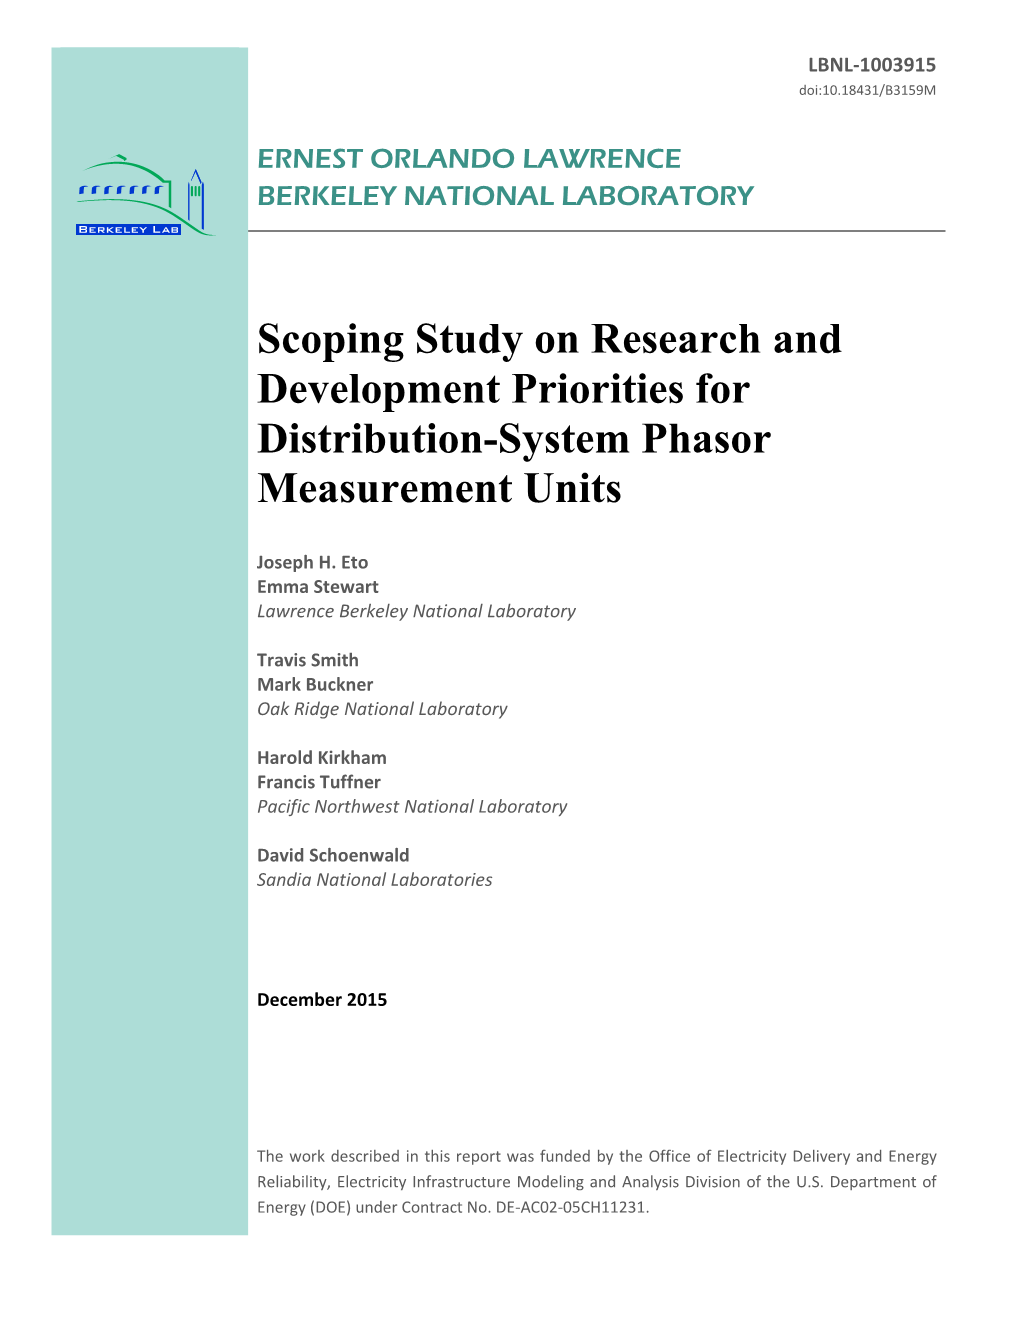 Scoping Study on Research and Development Needs for Distribution-System Phasor Measurement Units │I